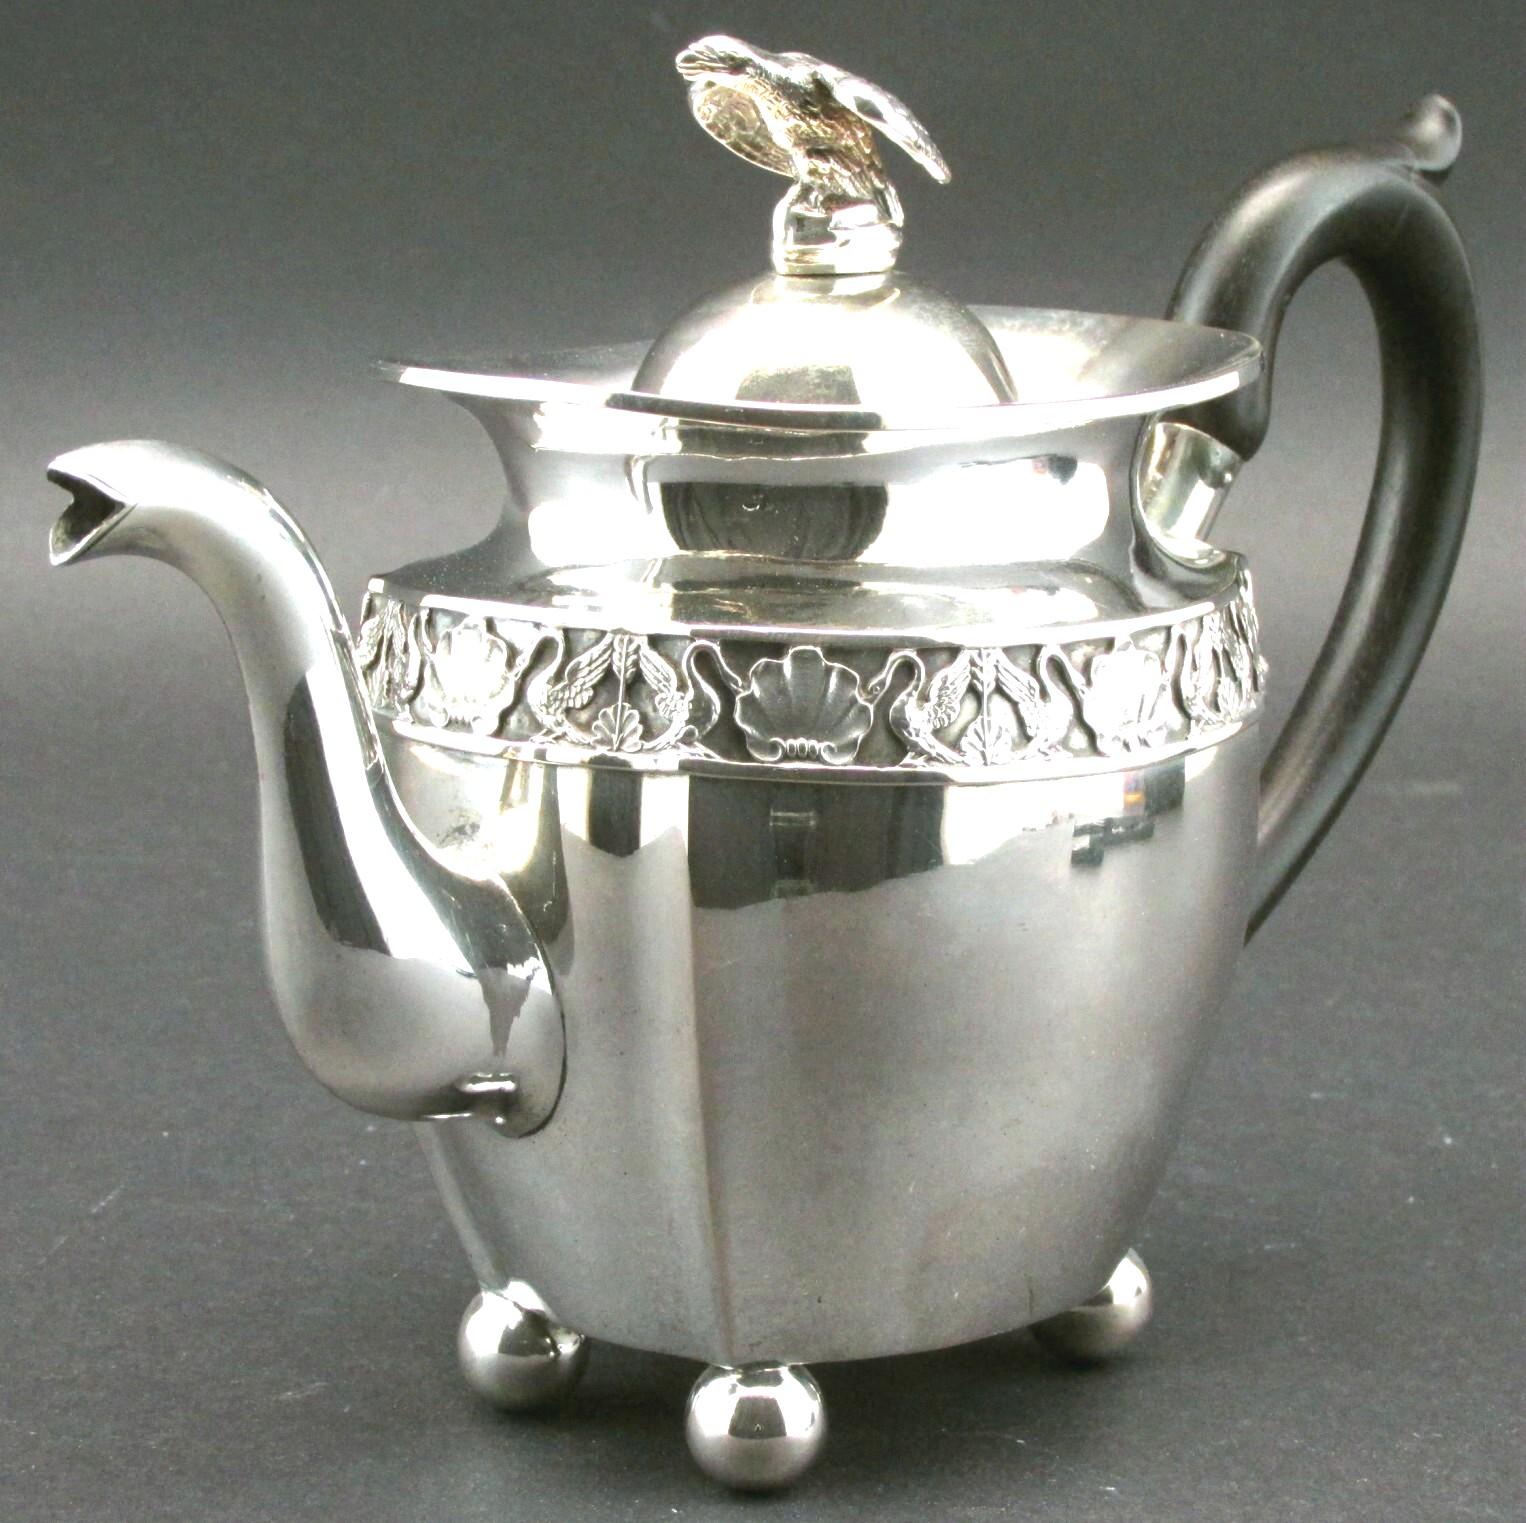 Fine Early 19th Century Neoclassical Silver Teapot, Probably Russian Circa 1825 In Good Condition For Sale In Ottawa, Ontario